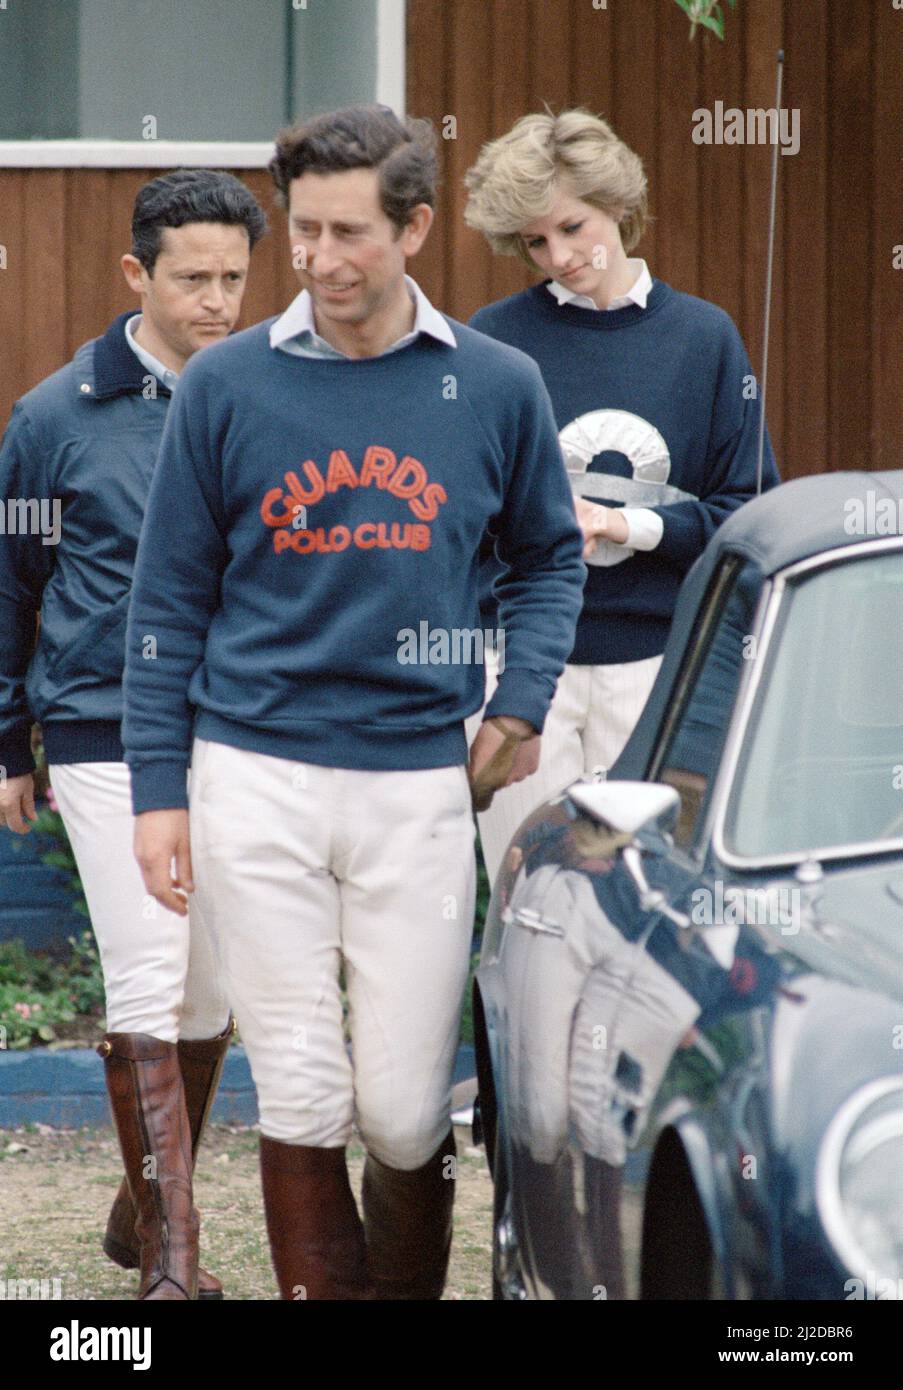 Prince Charles and Princess Diana, the Prince and Princess  of Wales,   at Smith's Lawn, Windsor accompanied by Charles 'Les Diables Bleus' teammate Guy Wildenstein before taking part in their match at Guards Polo Club.25th May 1986. Stock Photo